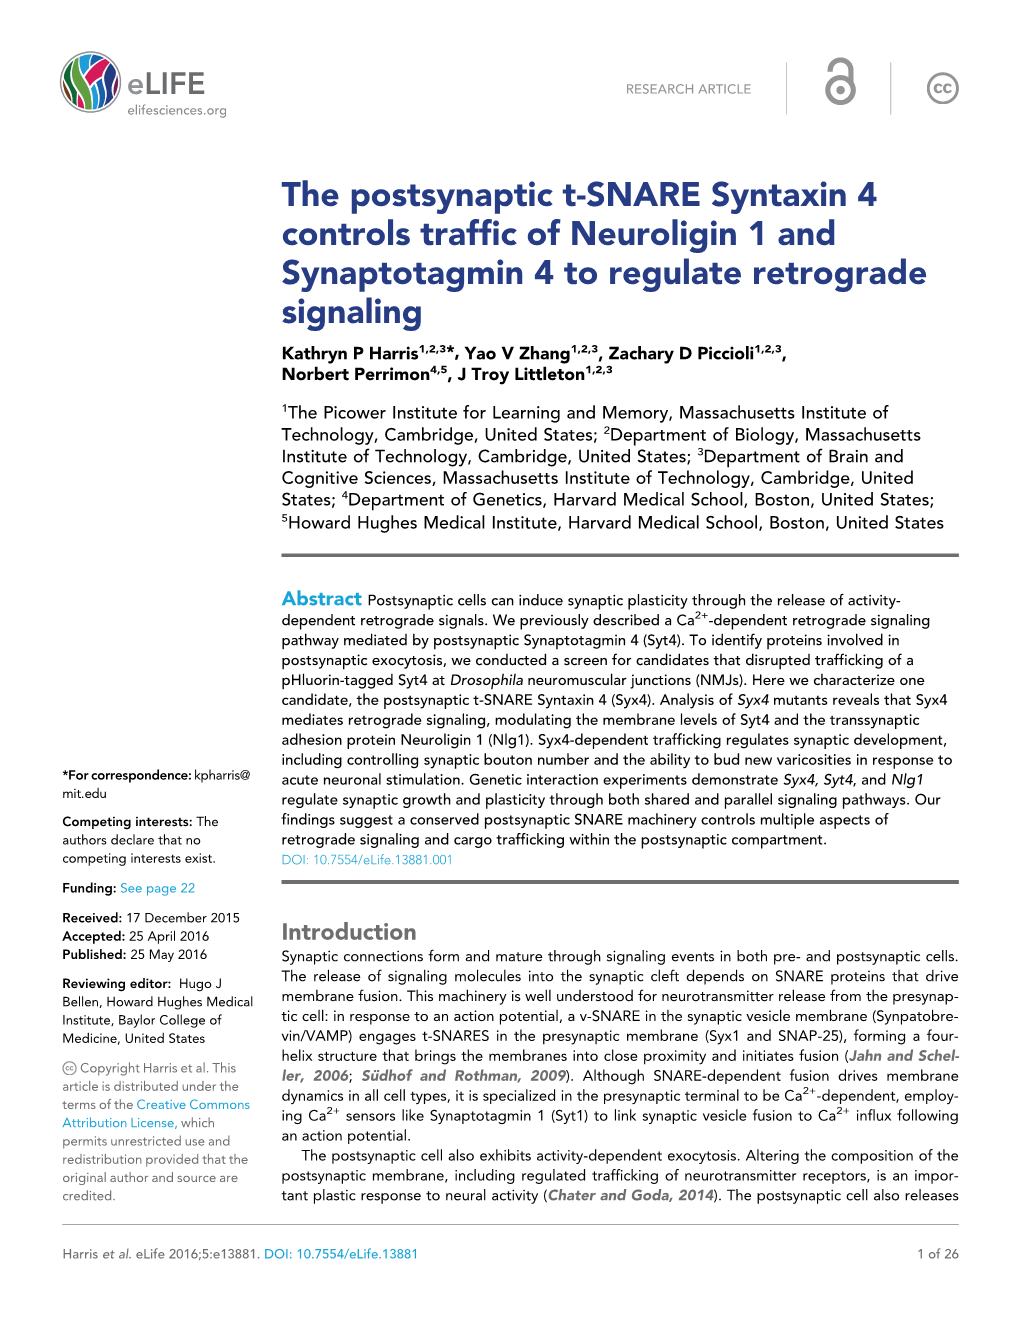 The Postsynaptic T-SNARE Syntaxin 4 Controls Traffic of Neuroligin 1 And